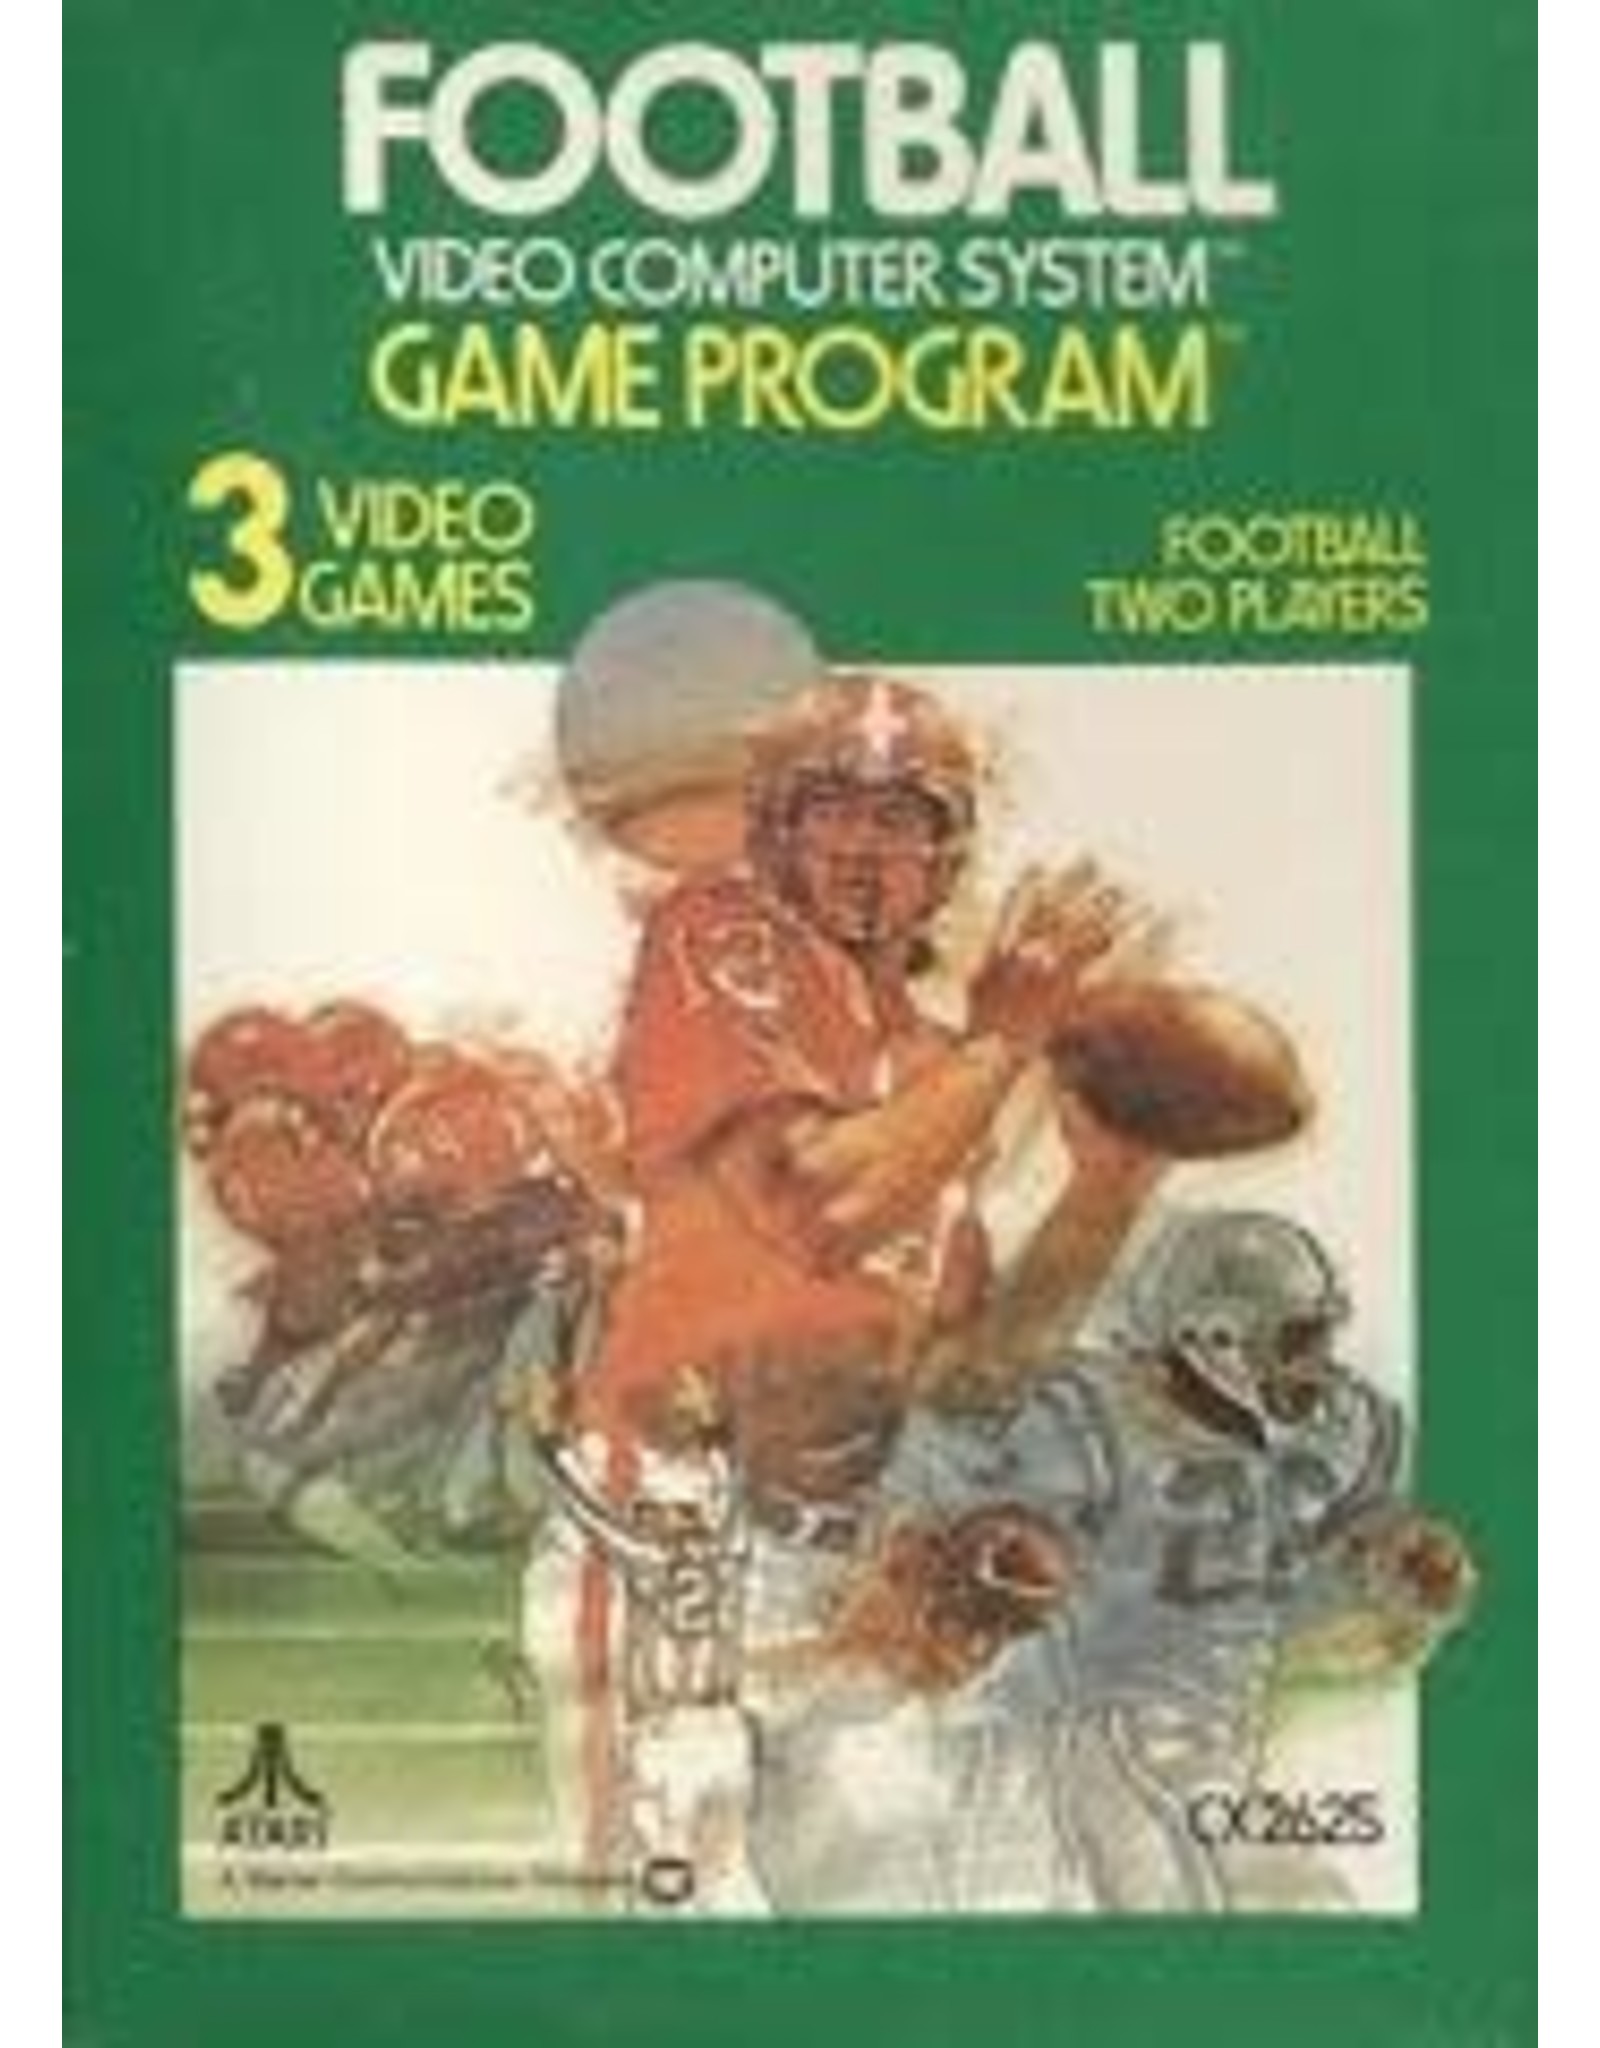 Atari 2600 Football (Cart Only, Text Label, Missing End Label)